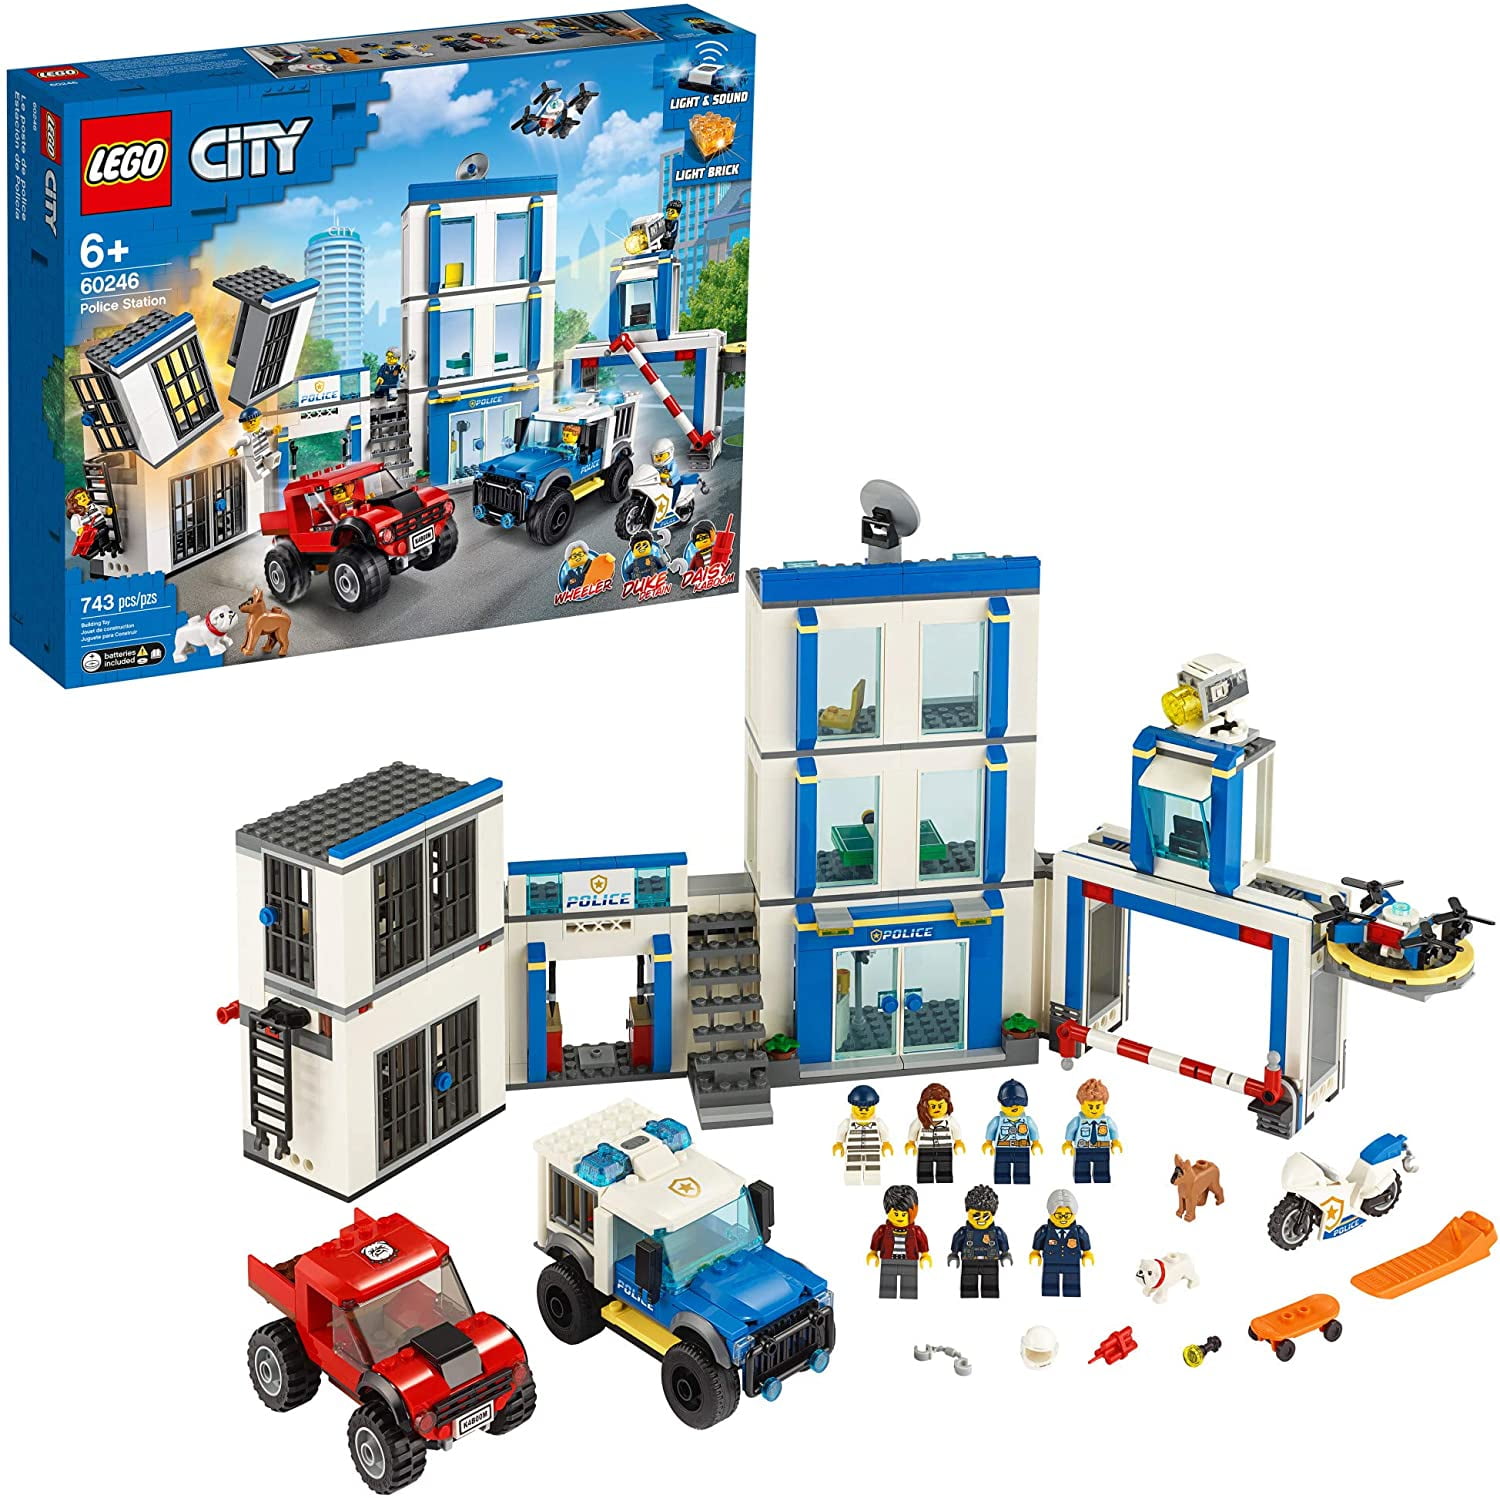 LEGO City Police Station 60246 Police Toy, Fun Building ...